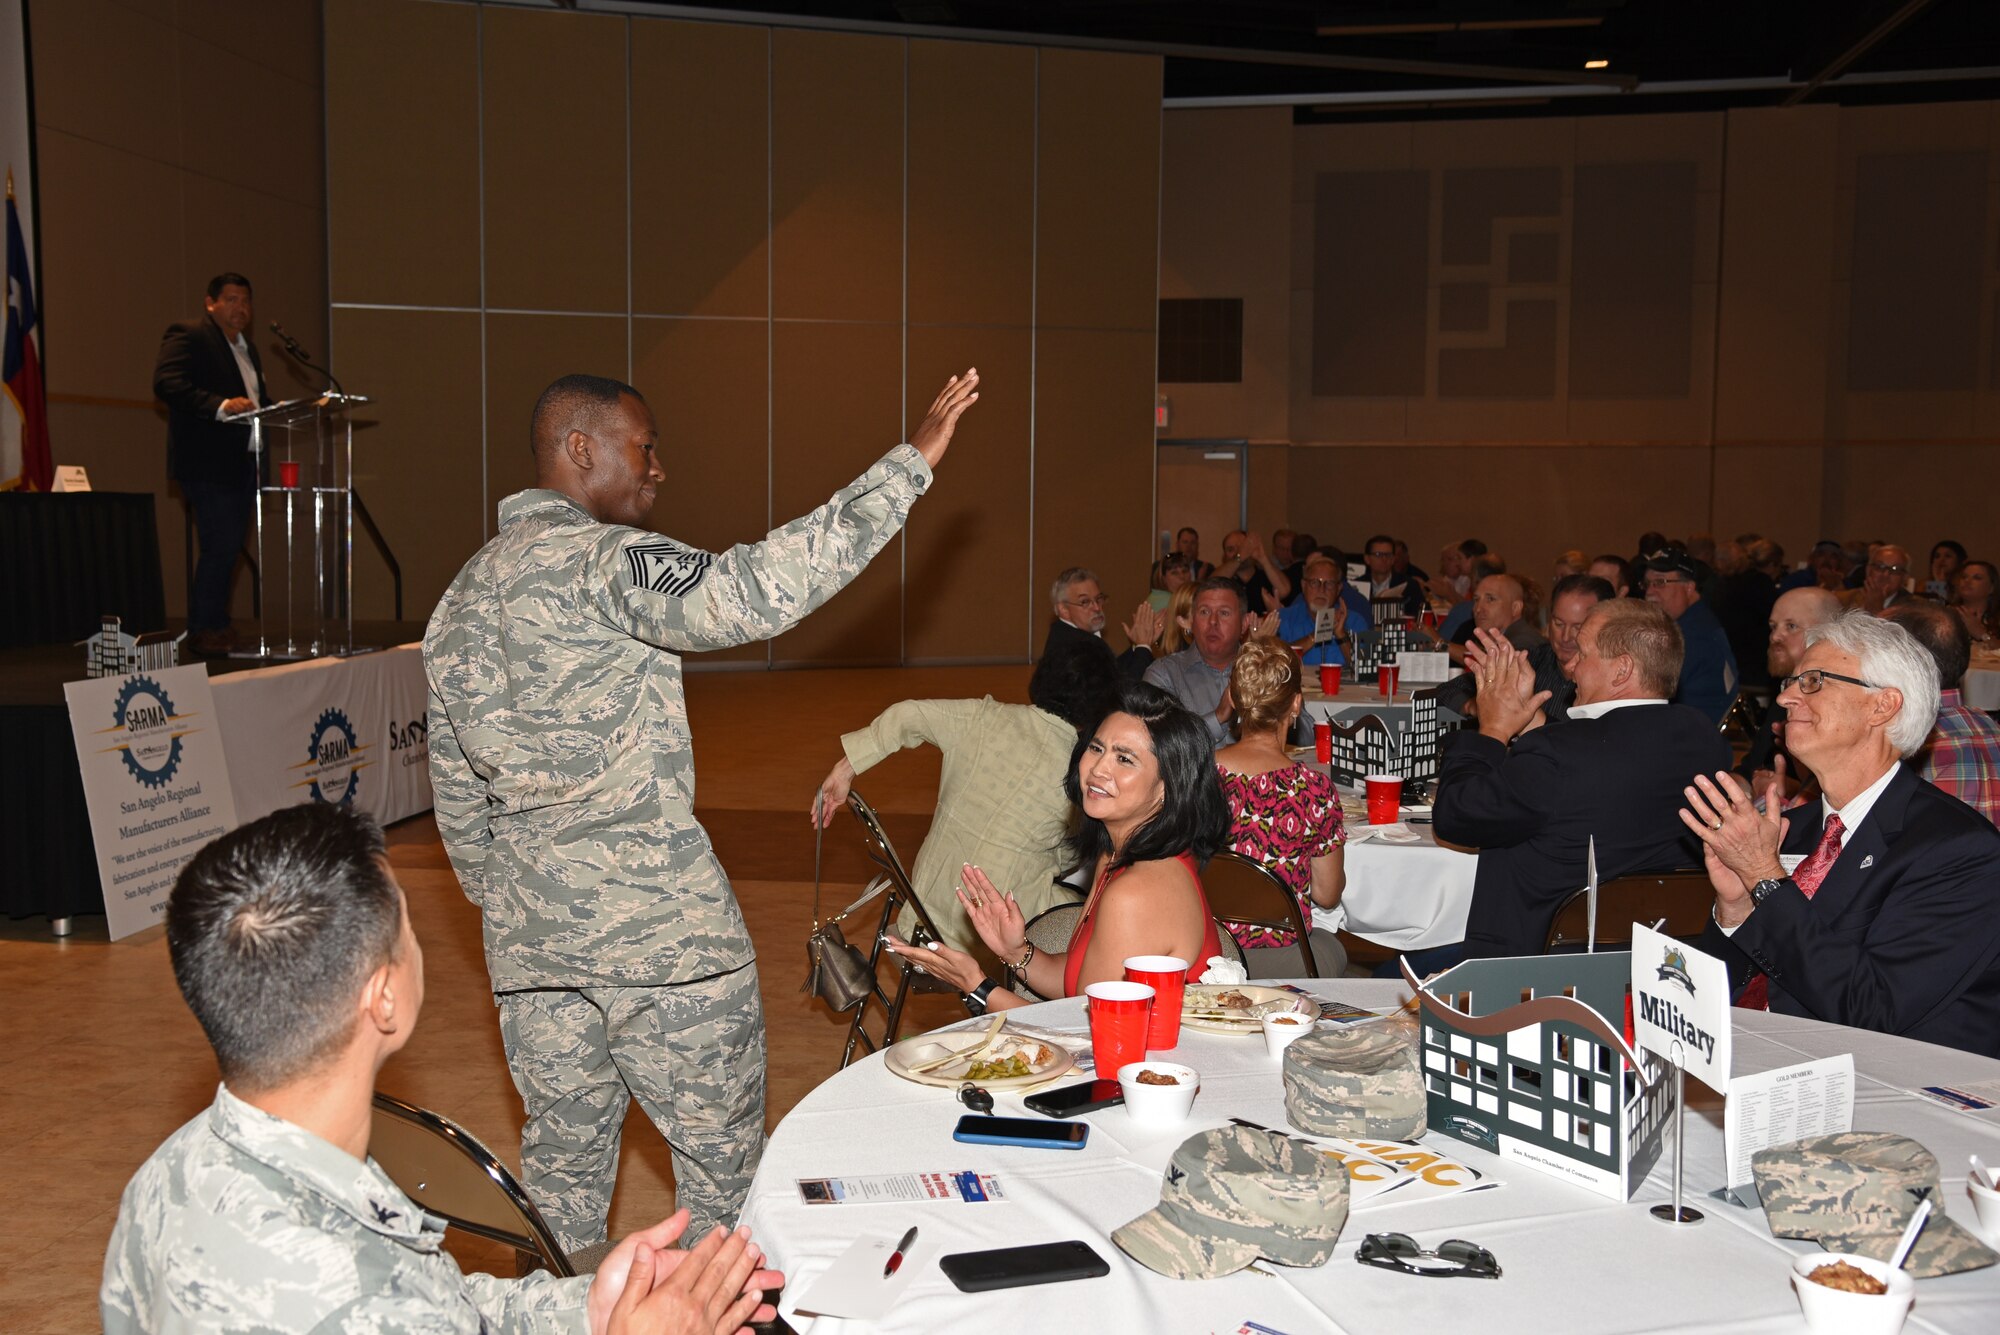 U.S. Air Force Chief Master Sgt. Lavor Kirkpatrick, 17th Training Wing command chief, greets attendees at the San Angelo Chamber of Commerce luncheon at the McNease Convention Center in San Angelo, Texas, Aug. 14, 2018. Kirkpatrick and Col. Robert Ramirez, 17th TRW vice commander, attended the event to introduce themselves to community members. (U.S. Air Force photo by Staff Sgt. Joshua Edwards/Released)